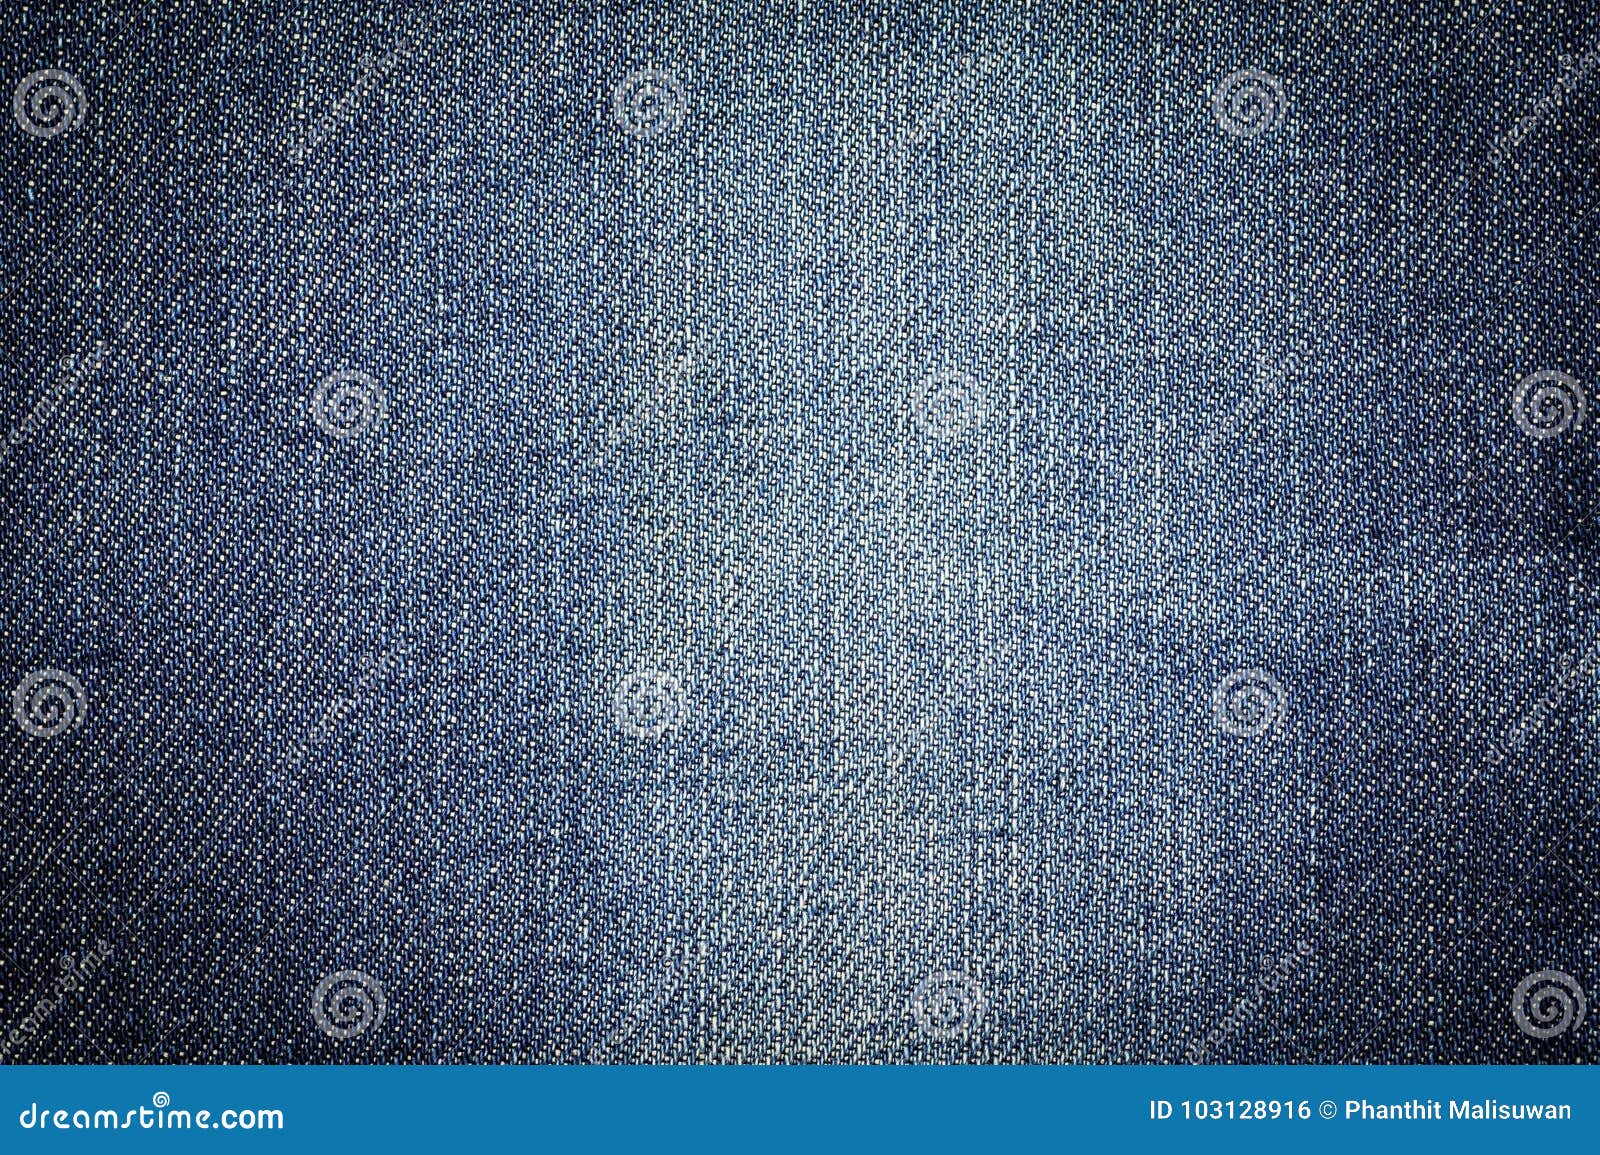 Denim Jeans Fabric Texture or Denim Jeans Background for Design. Stock ...